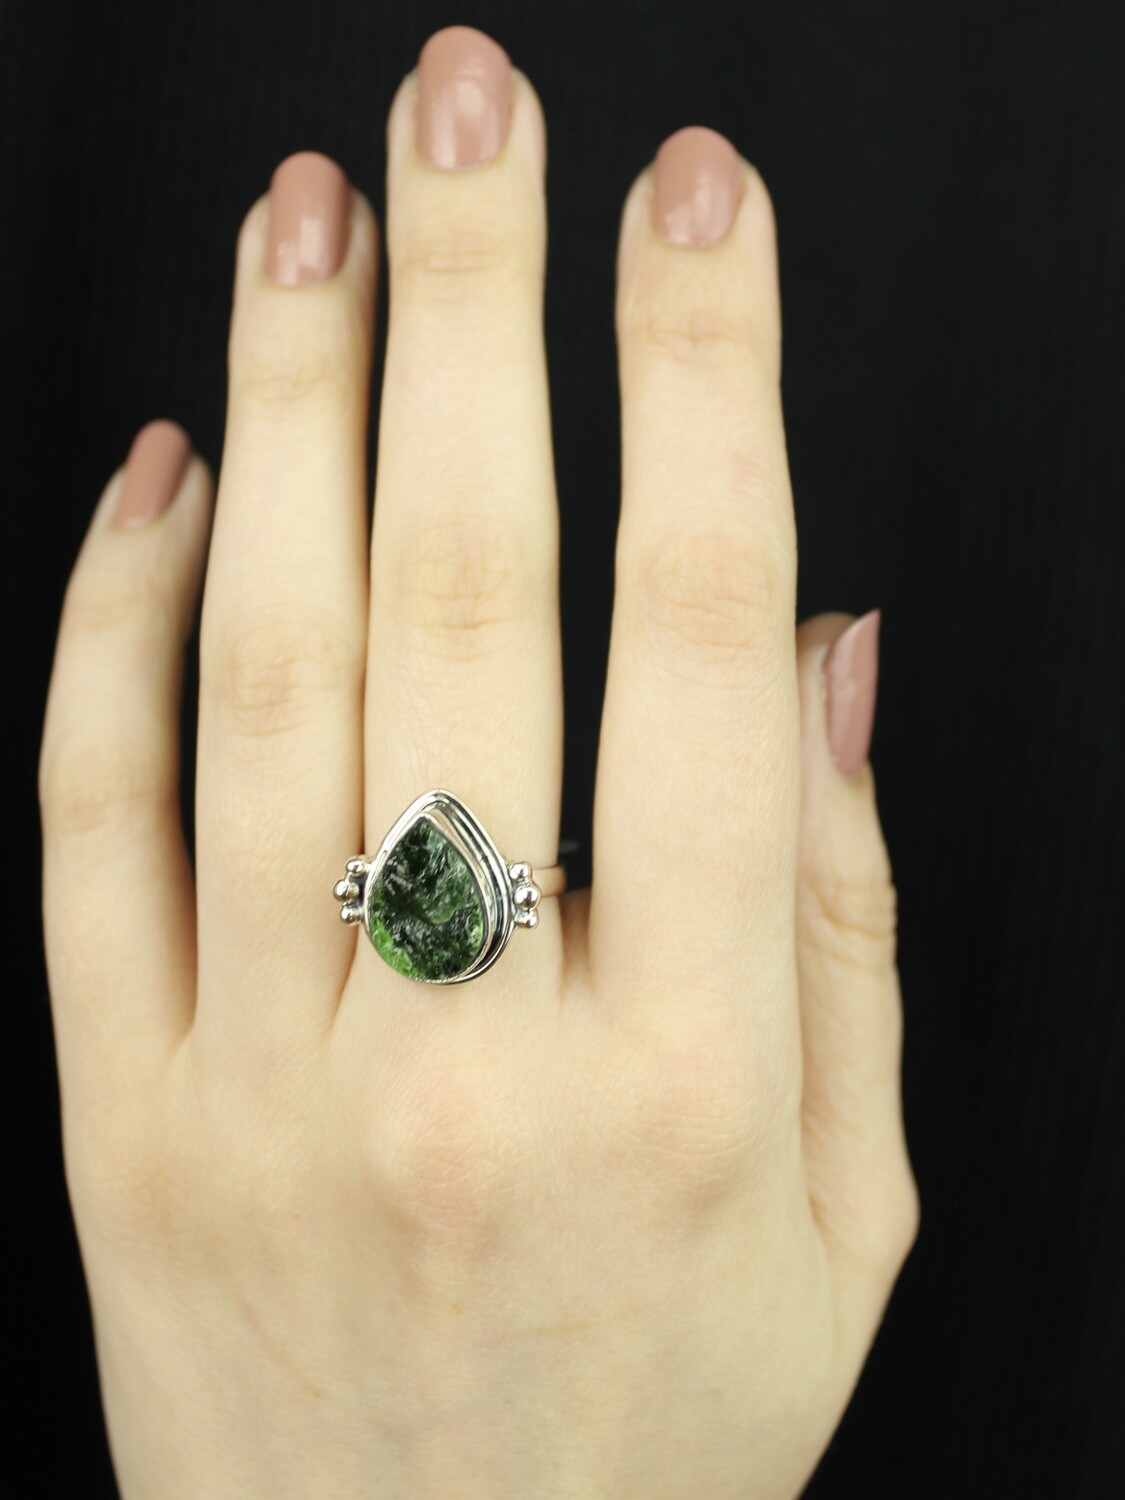 SIZE 7.25 - Sterling Silver Chrome Diopside Ring - RIG7124